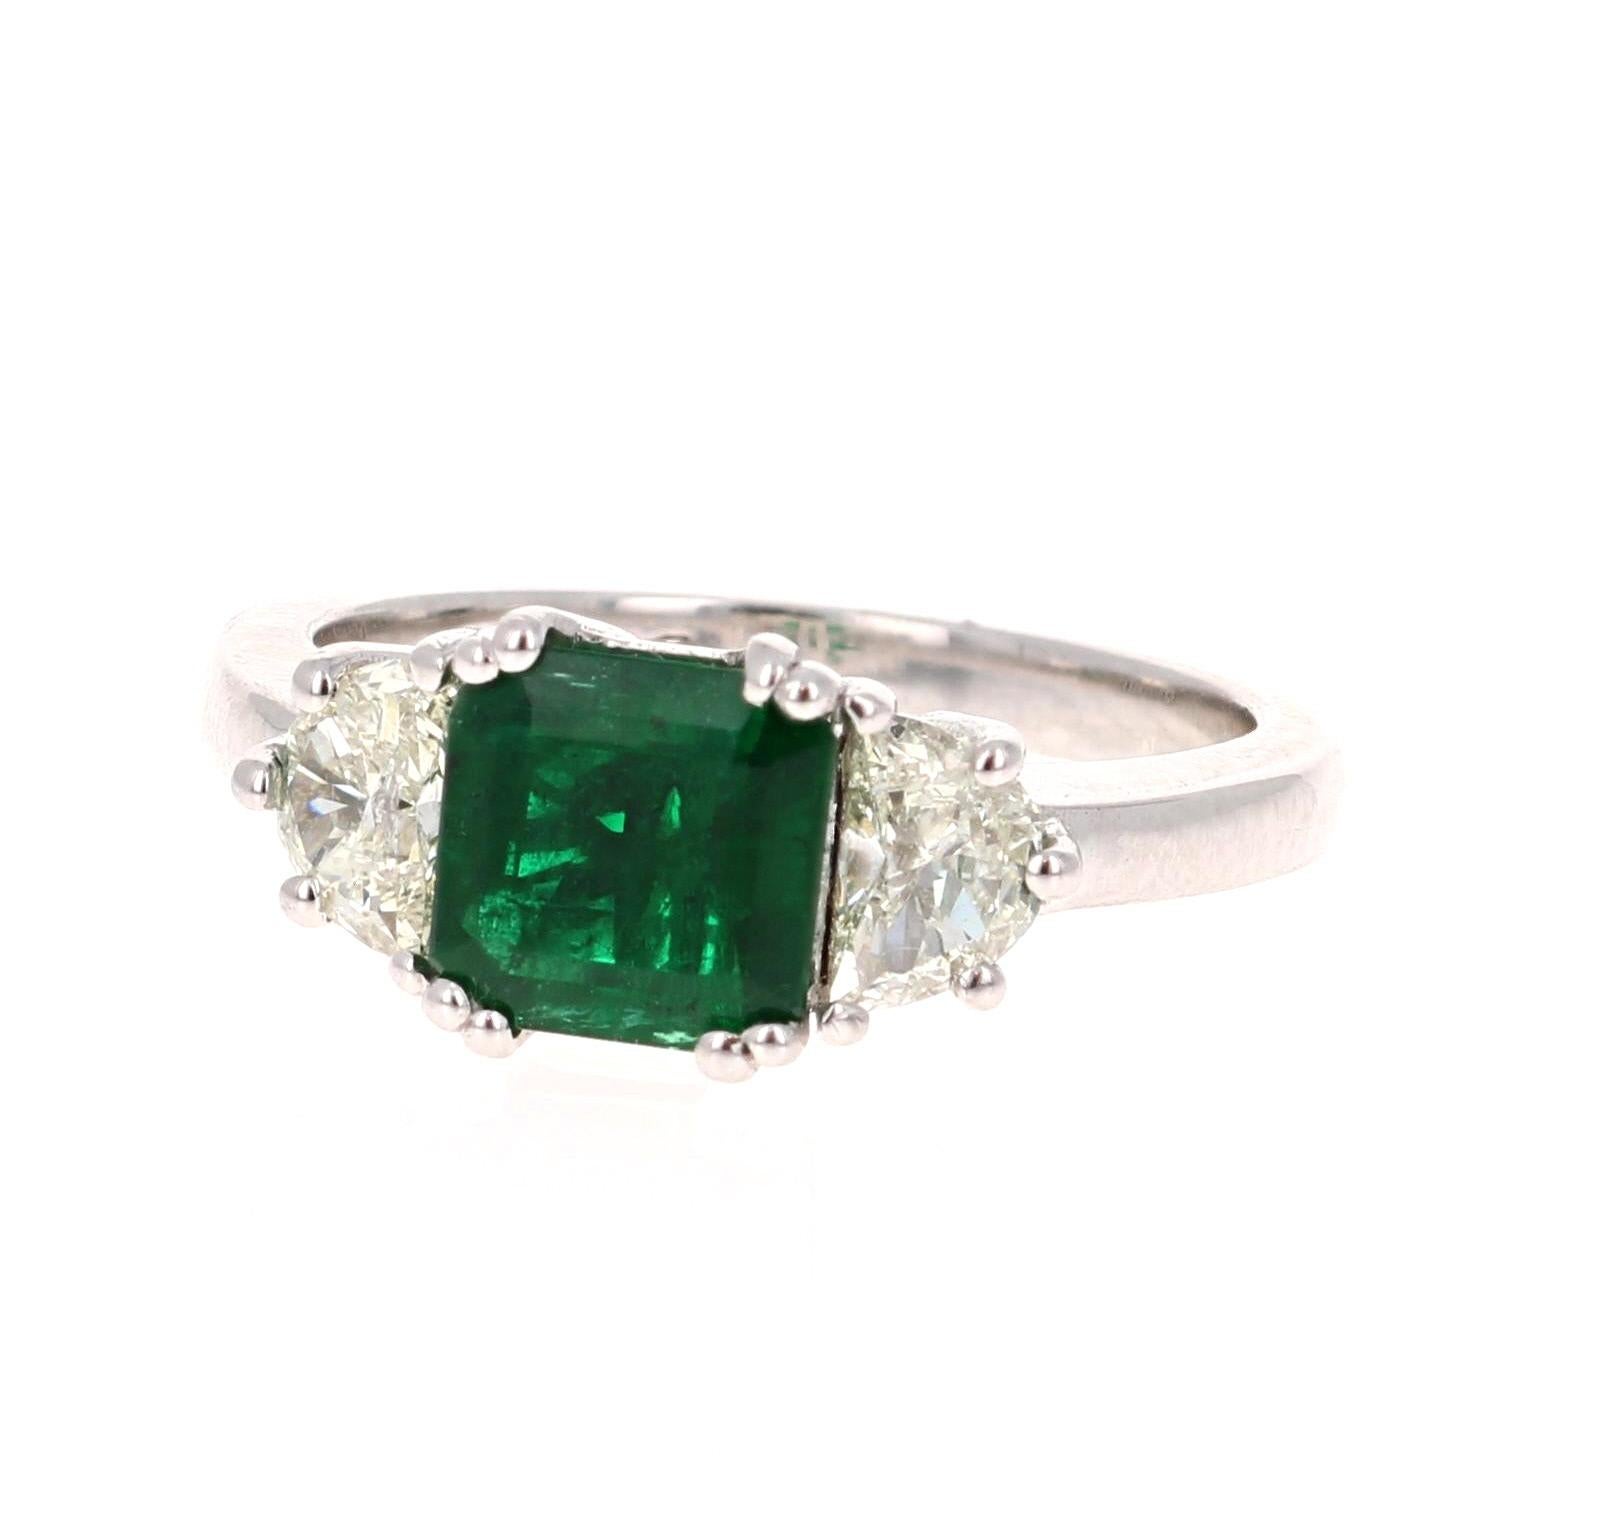 Stunning Emerald and Diamond GIA Certified Three Stone Ring!

This ring has a Natural, Square Cut Emerald that is GIA Certified.  The GIA Certificate number is: 2205859301 so please feel free to verify the attributes of the Emerald using the